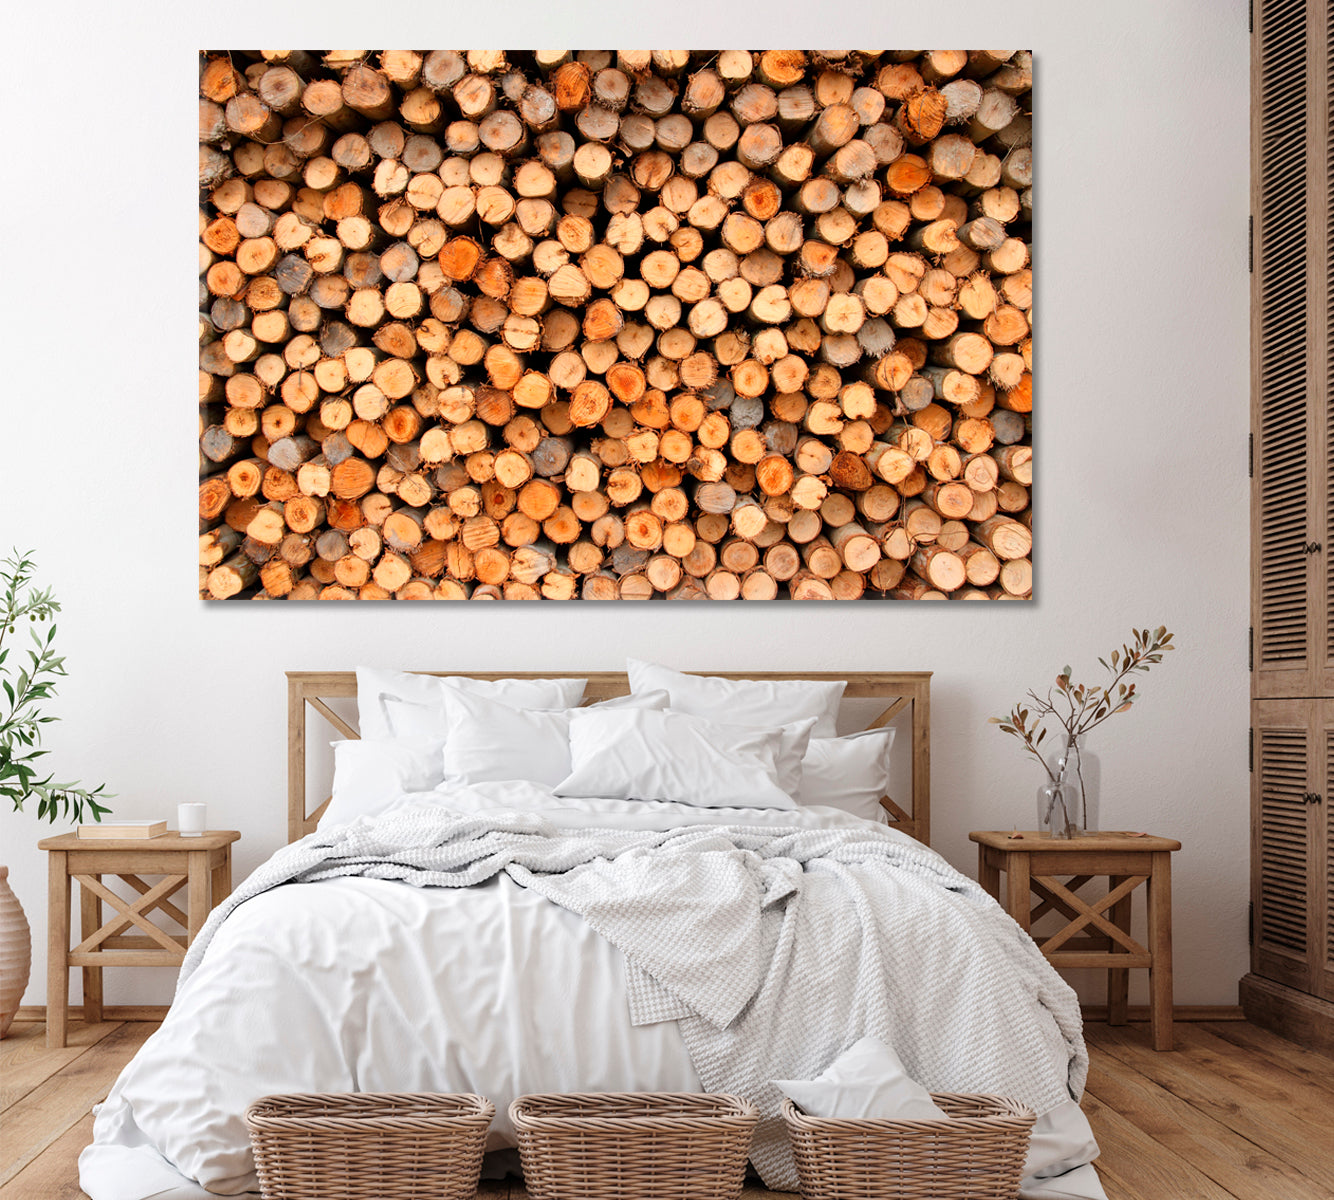 Logs of Eucalyptus Trees Canvas Print ArtLexy 1 Panel 24"x16" inches 